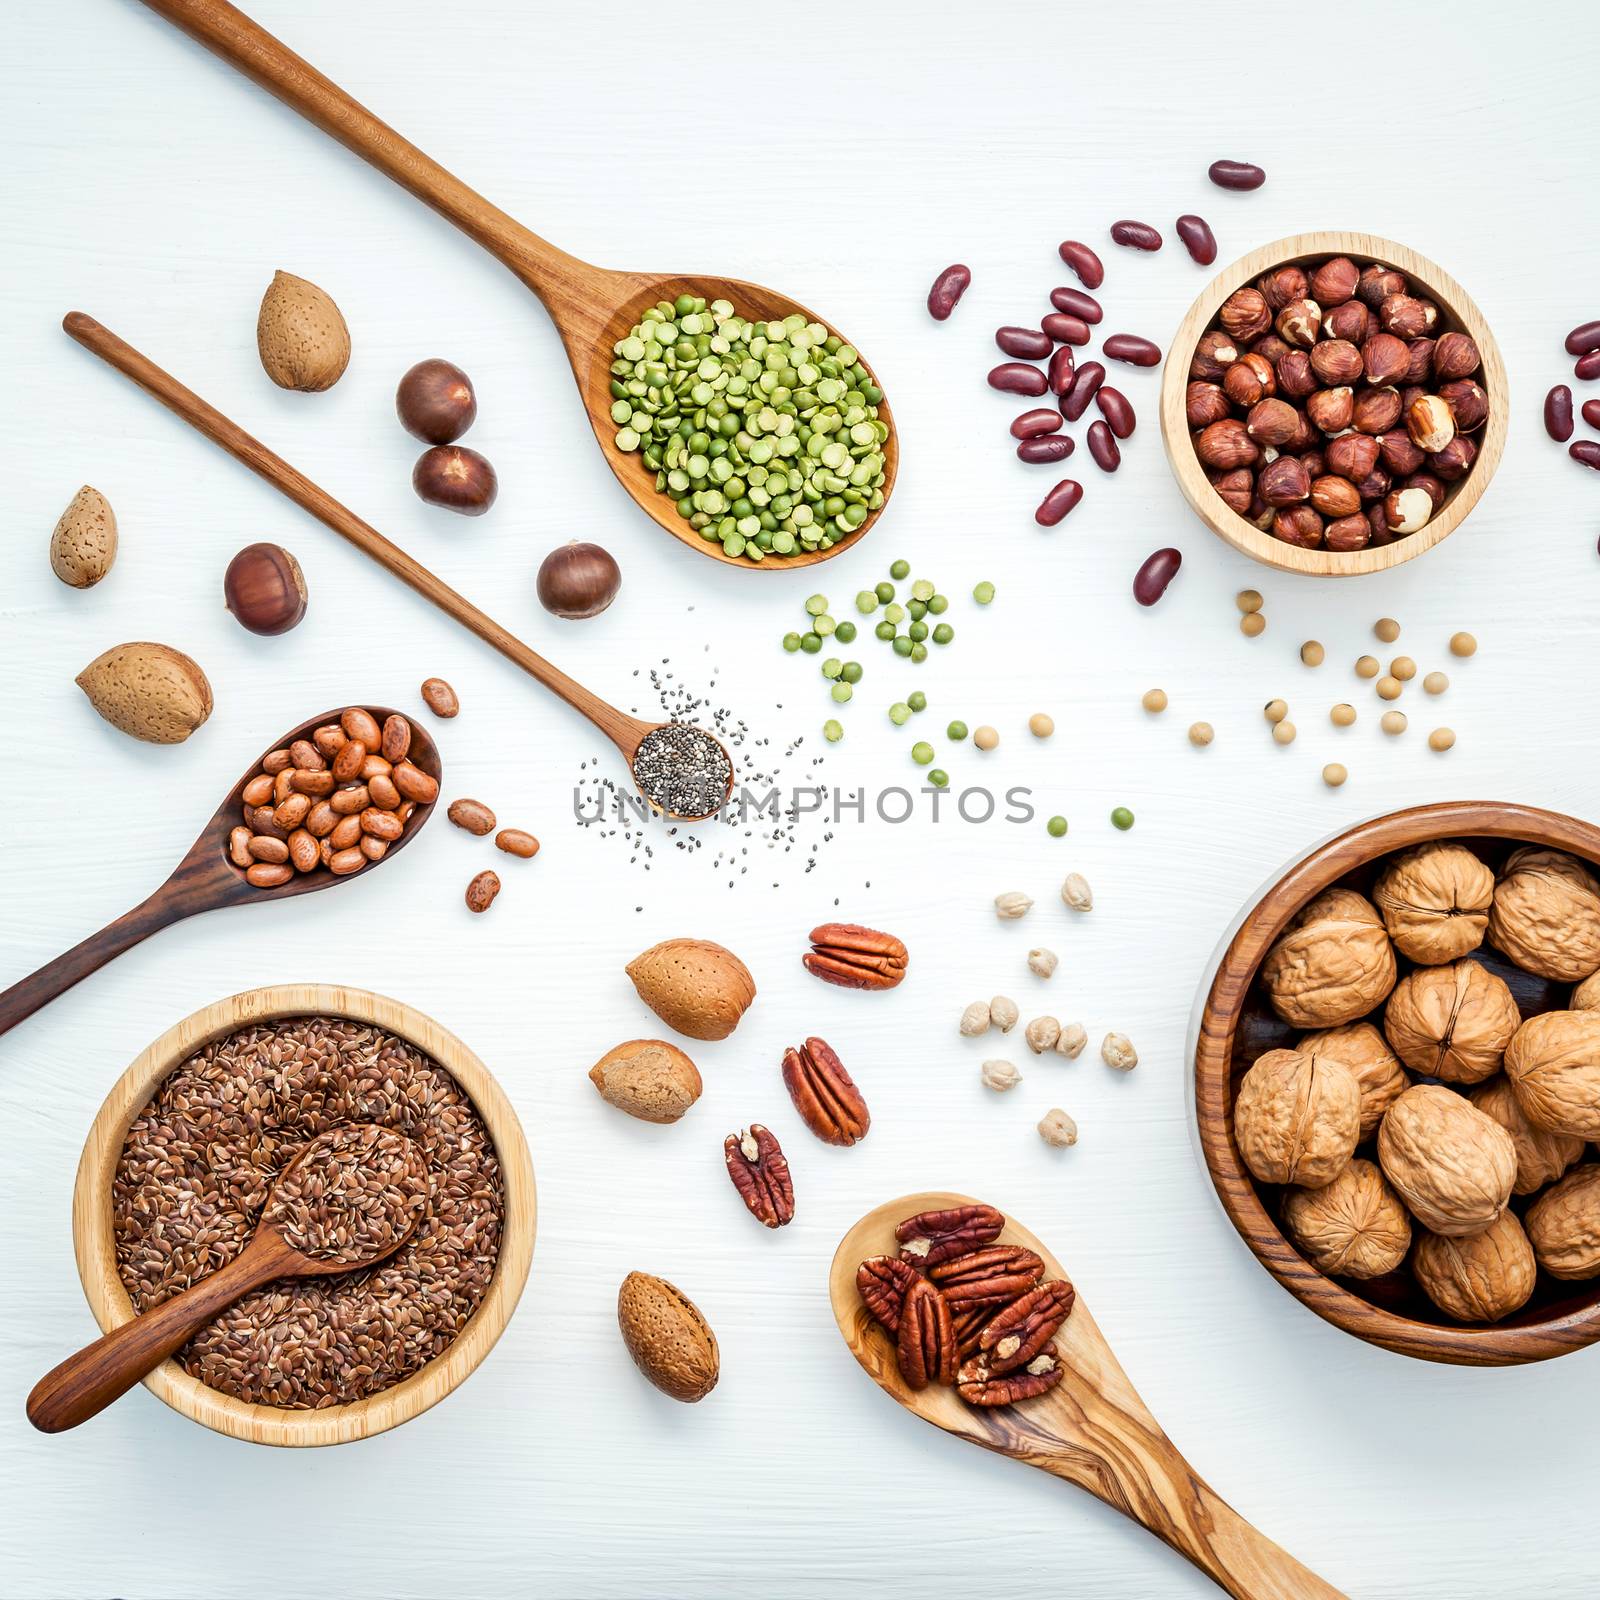 Bowls and spoons of various legumes and different kinds of nuts  by kerdkanno